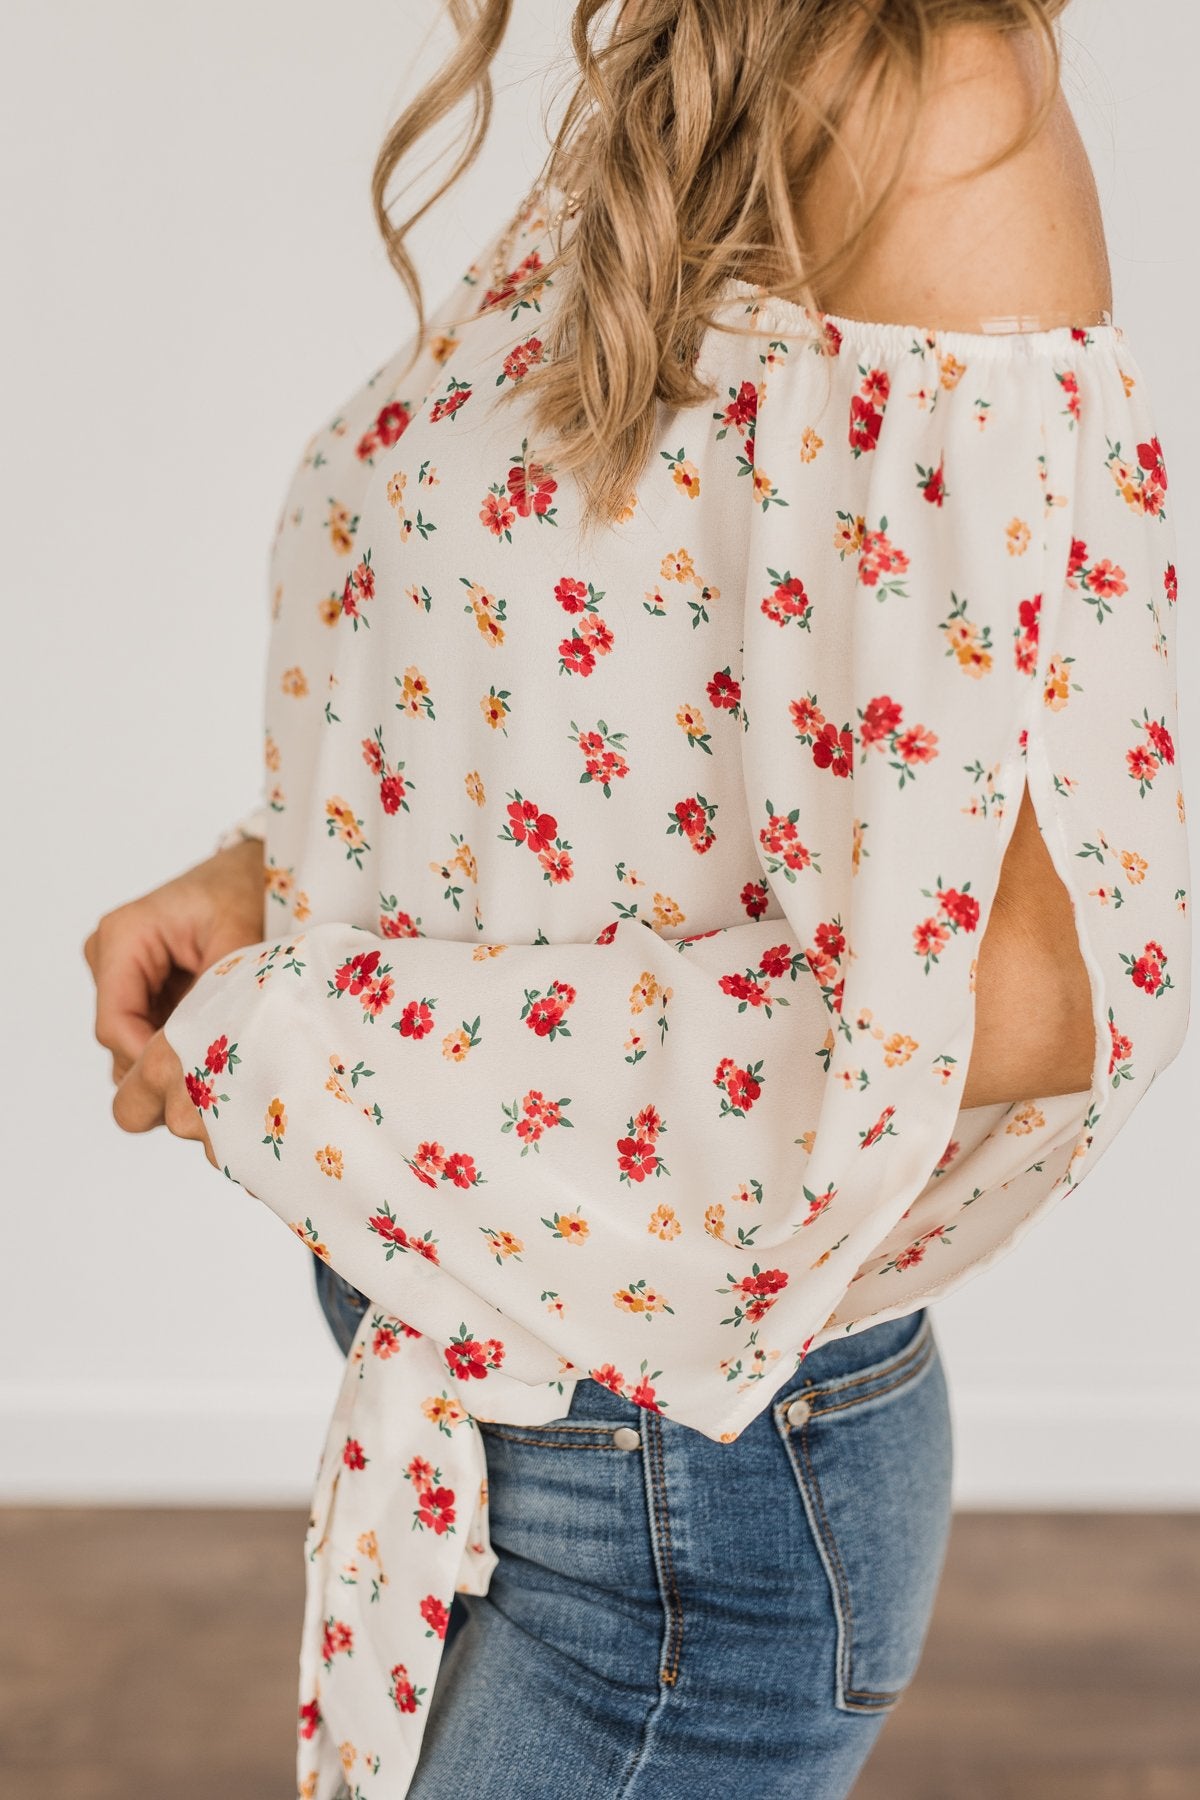 Match Made In Heaven Off The Shoulder Blouse- Cream